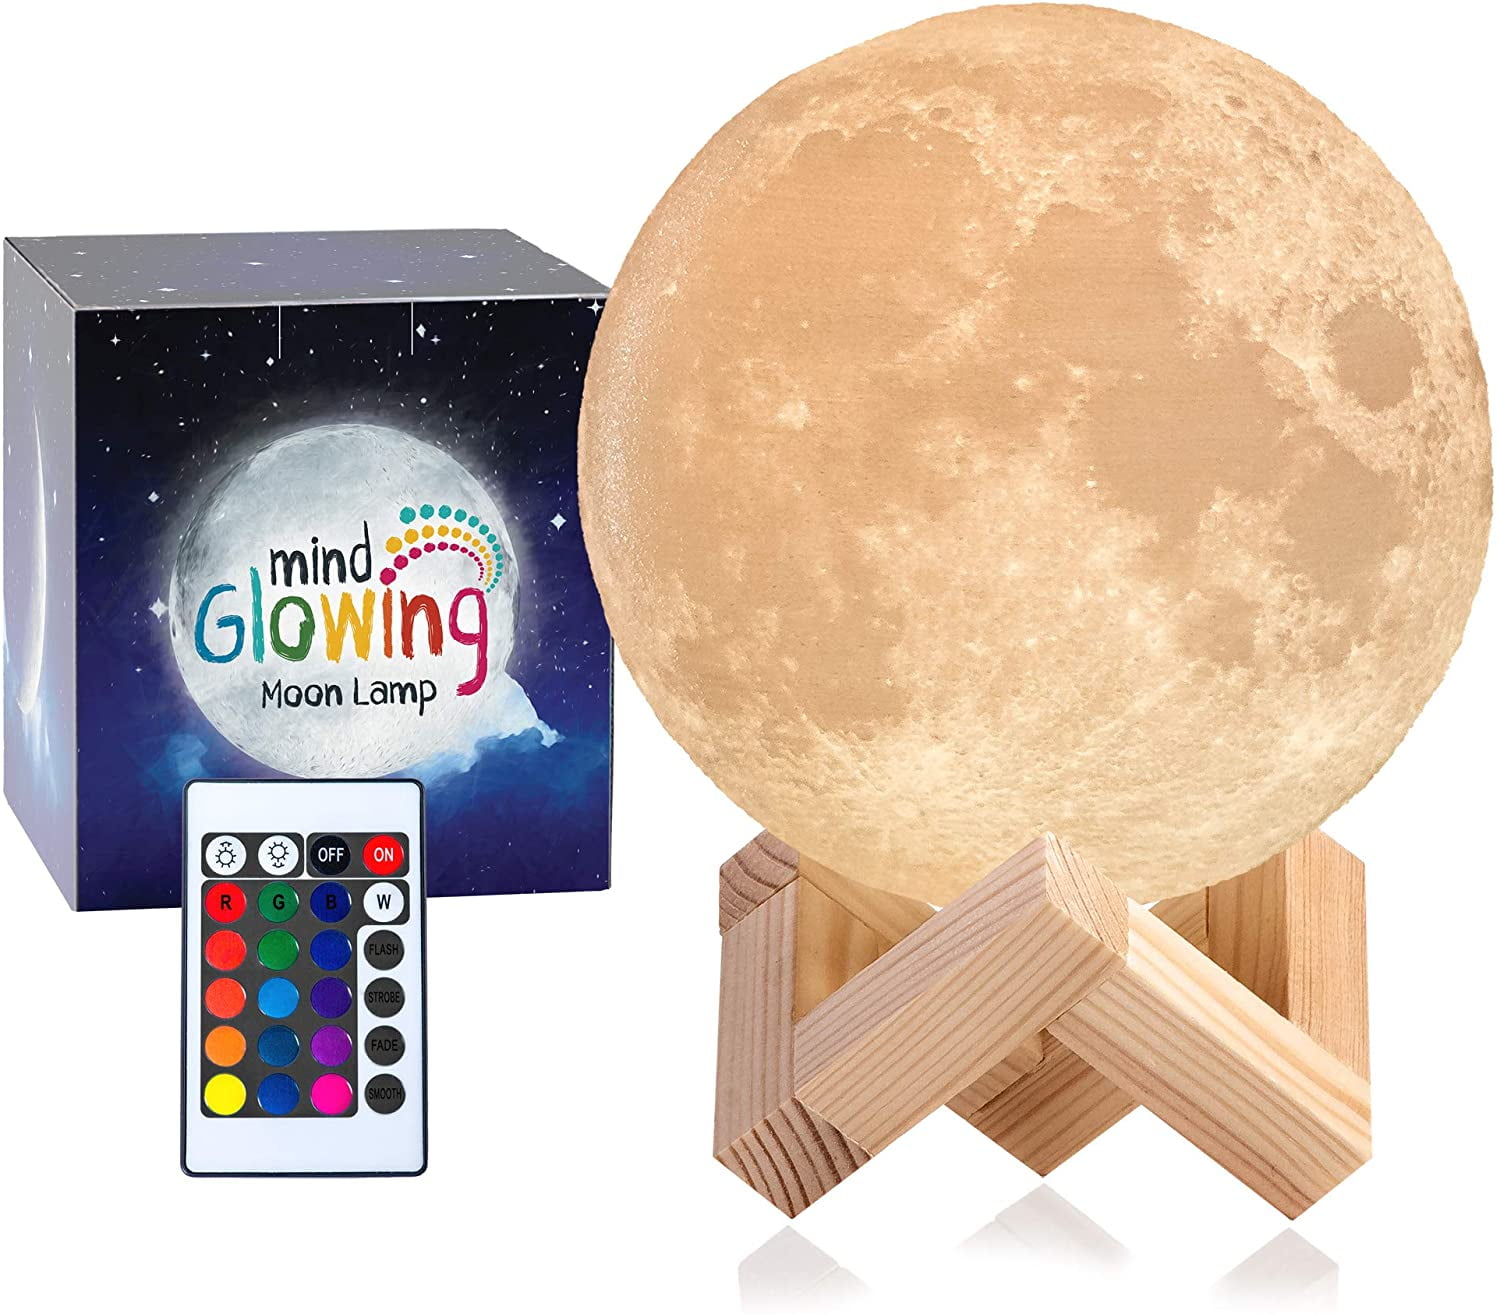 Dimmable 3D Magical Moon Lamp USB Rechargable LED Night Light Touch Sensor Gift 